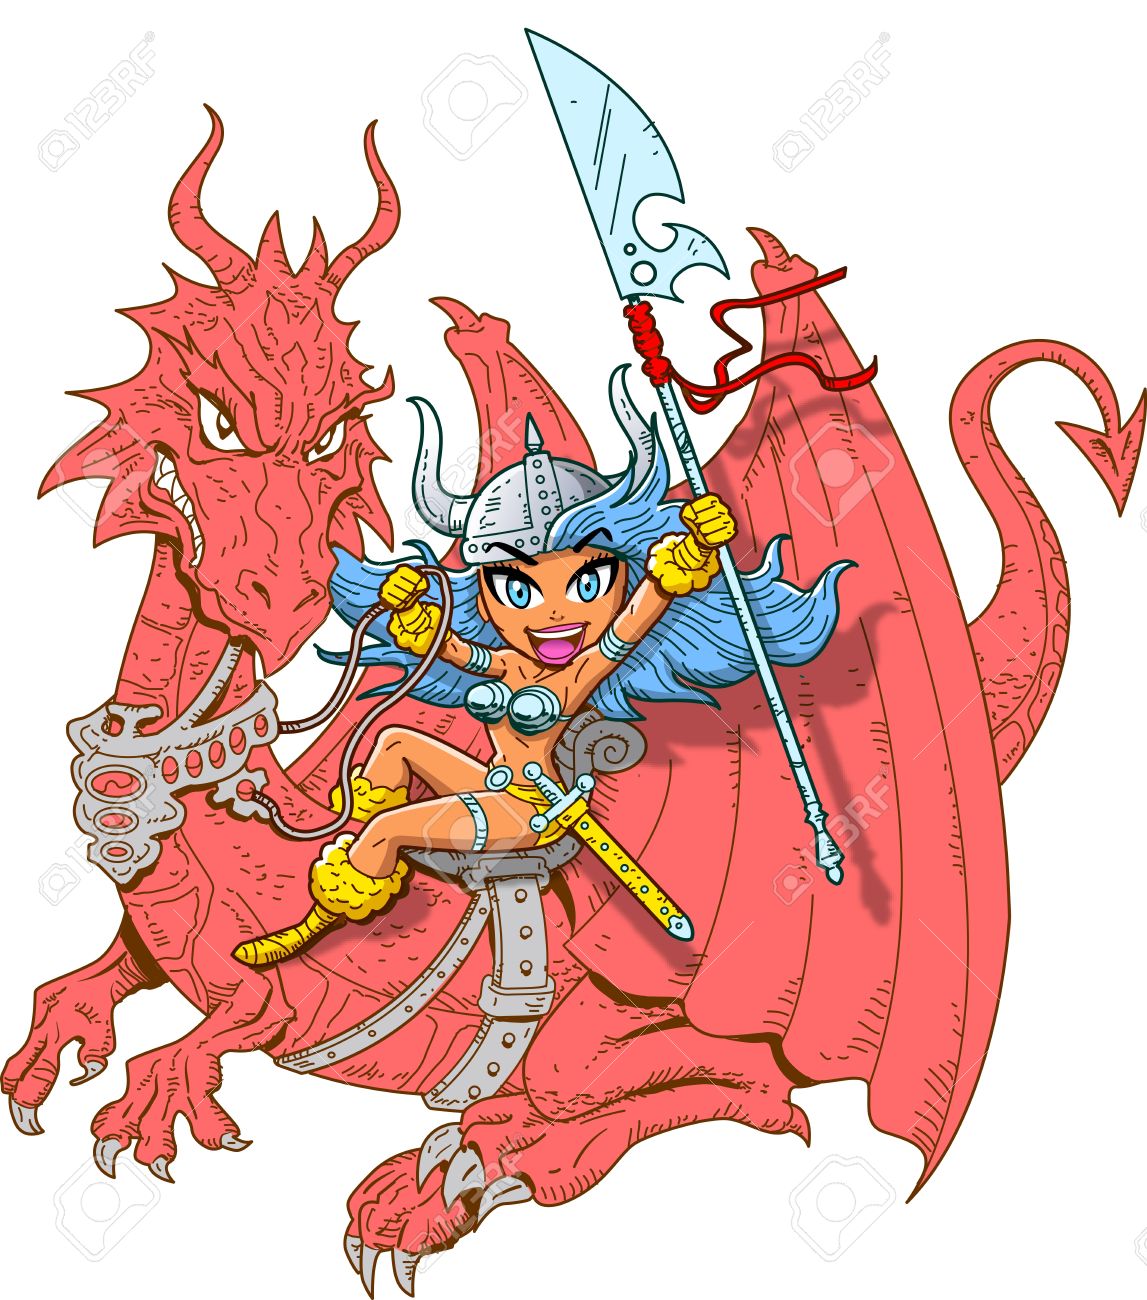 Dragon Rider clipart #11, Download drawings